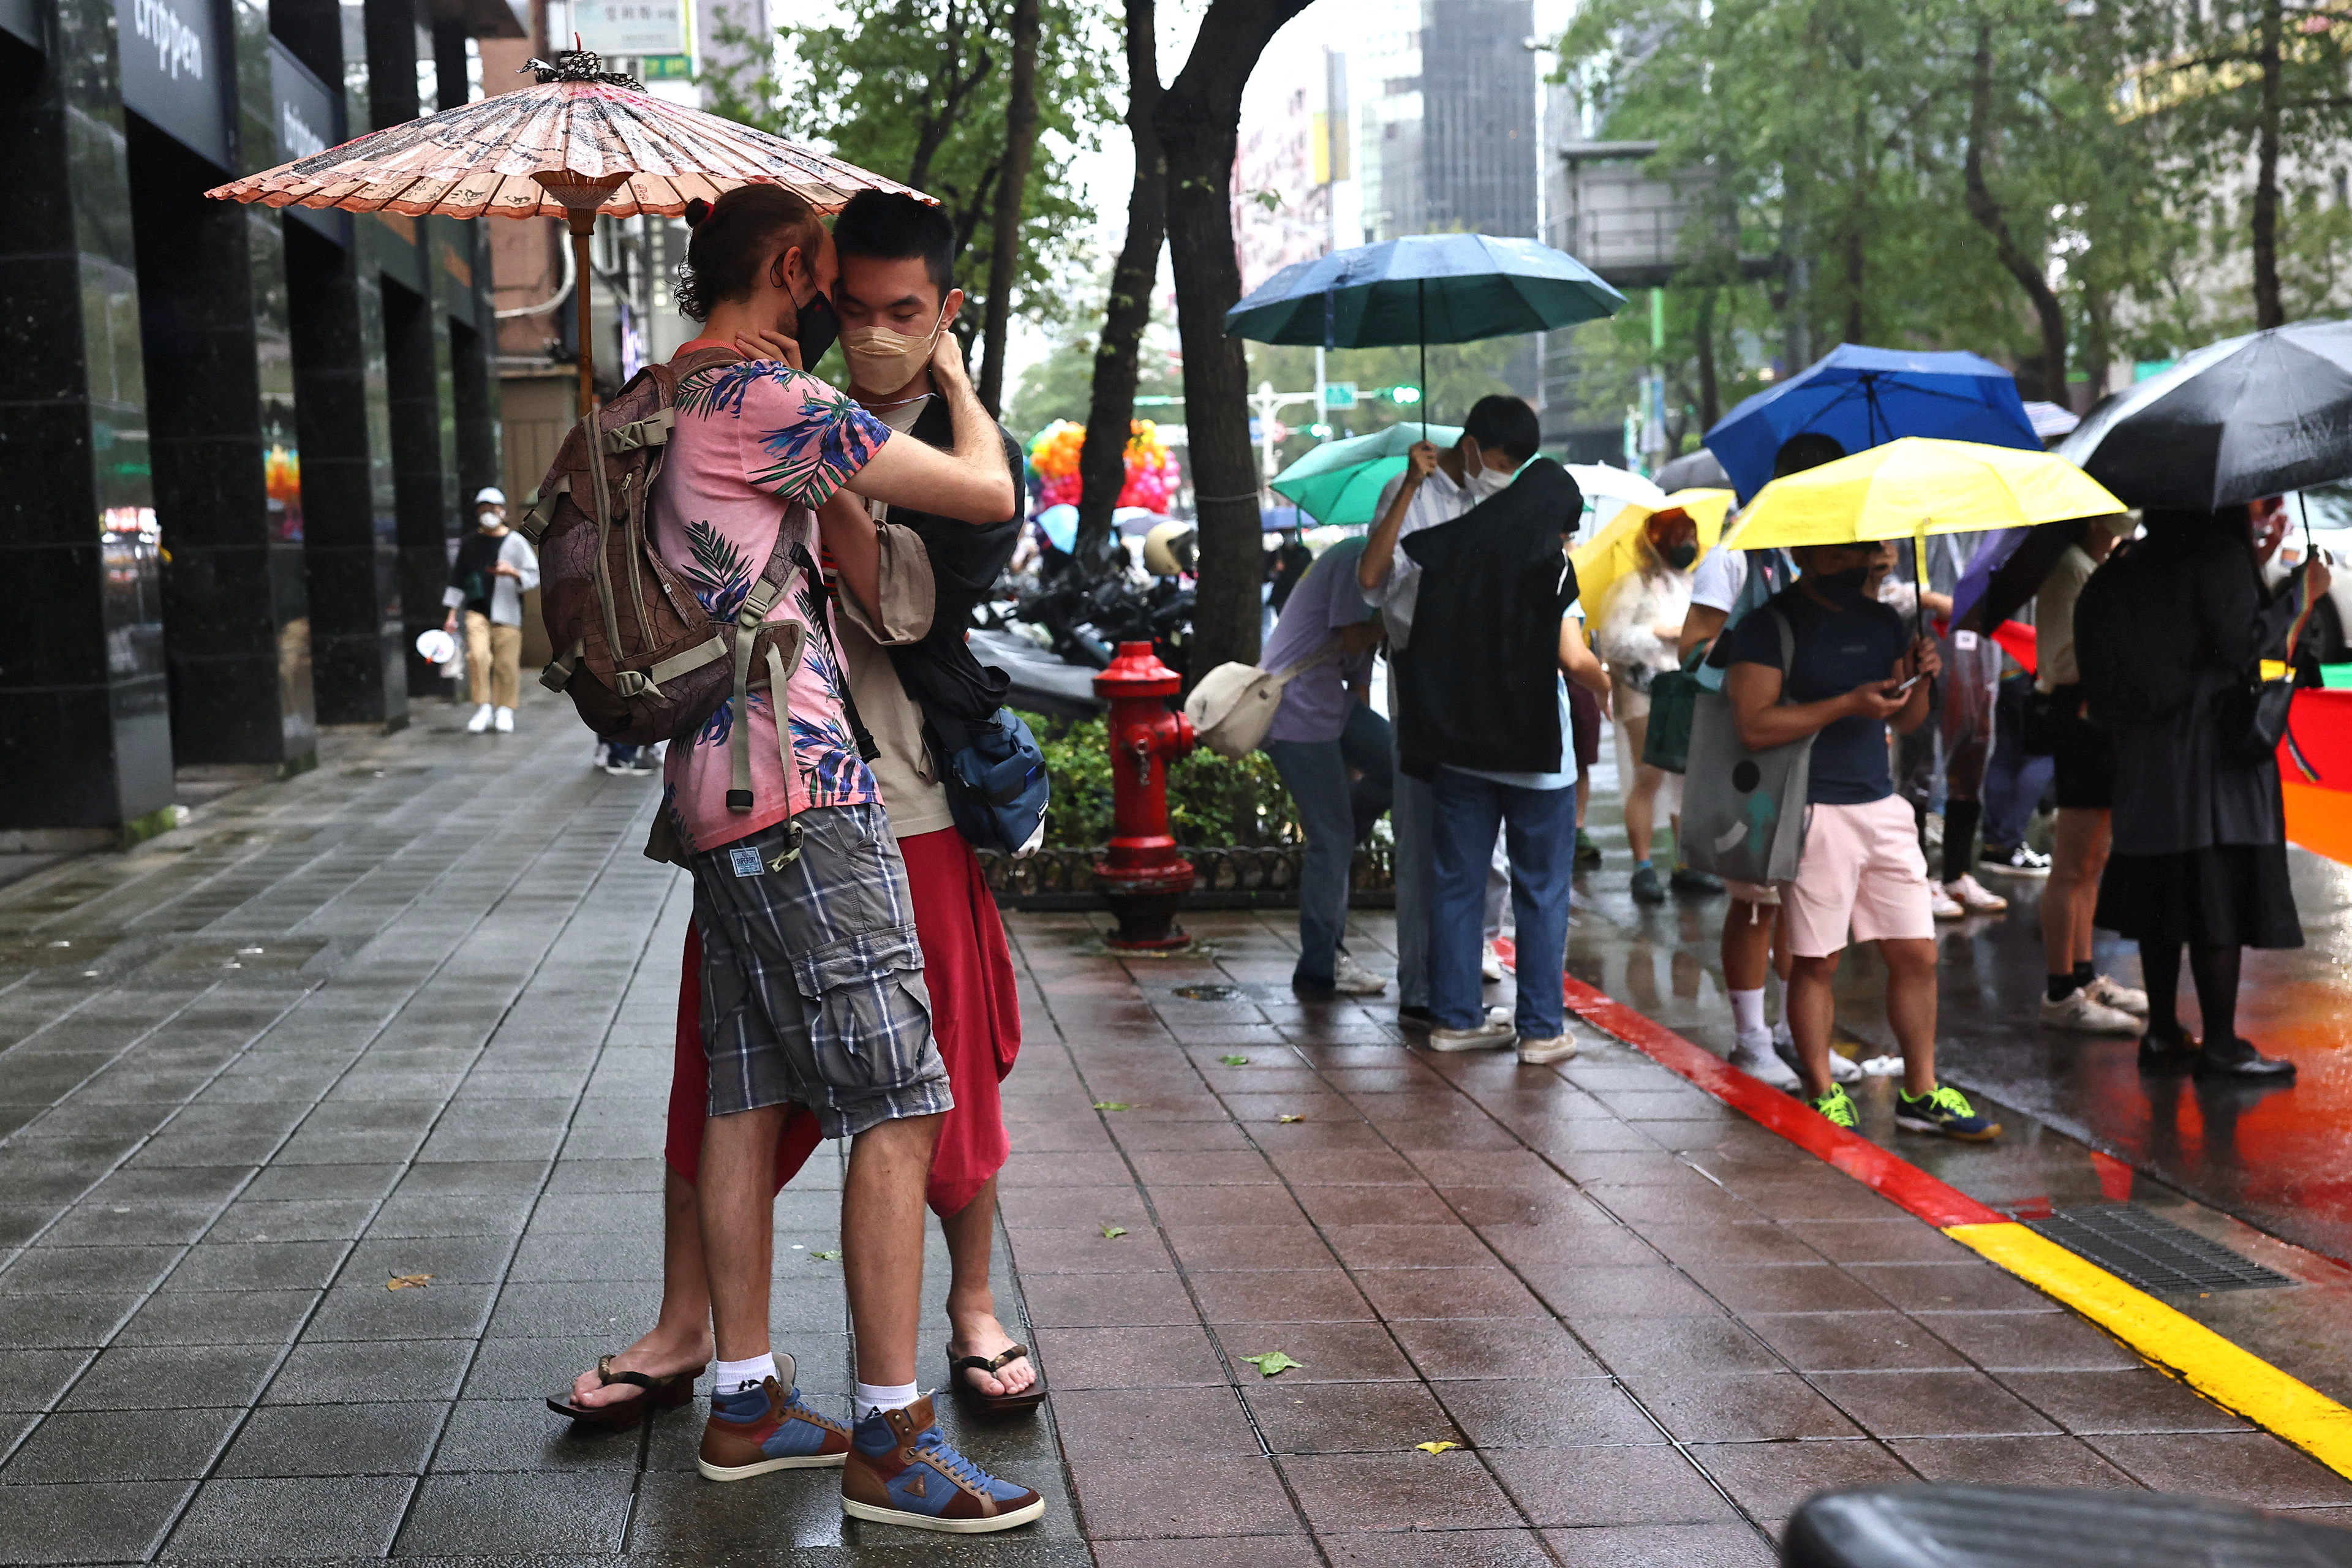 People embrace each other during the annual pride parade in Taipei